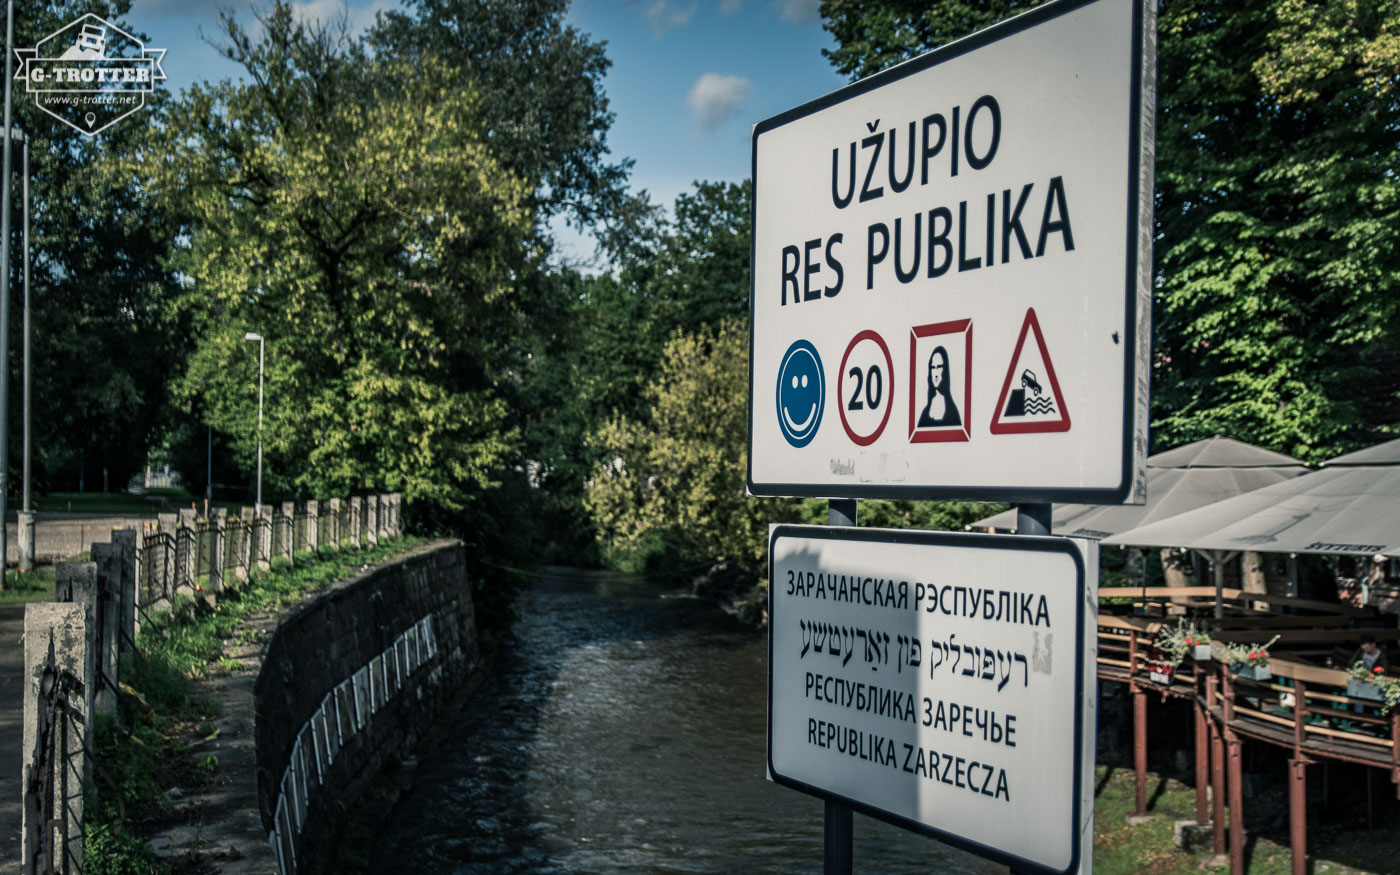 Užupis is a neighborhood in Vilnius with a bohemic and laissez-faire atmosphere. In 1997, the residents of the area declared the Republic of Užupis, along with its own flag, currency, president and a constitution.